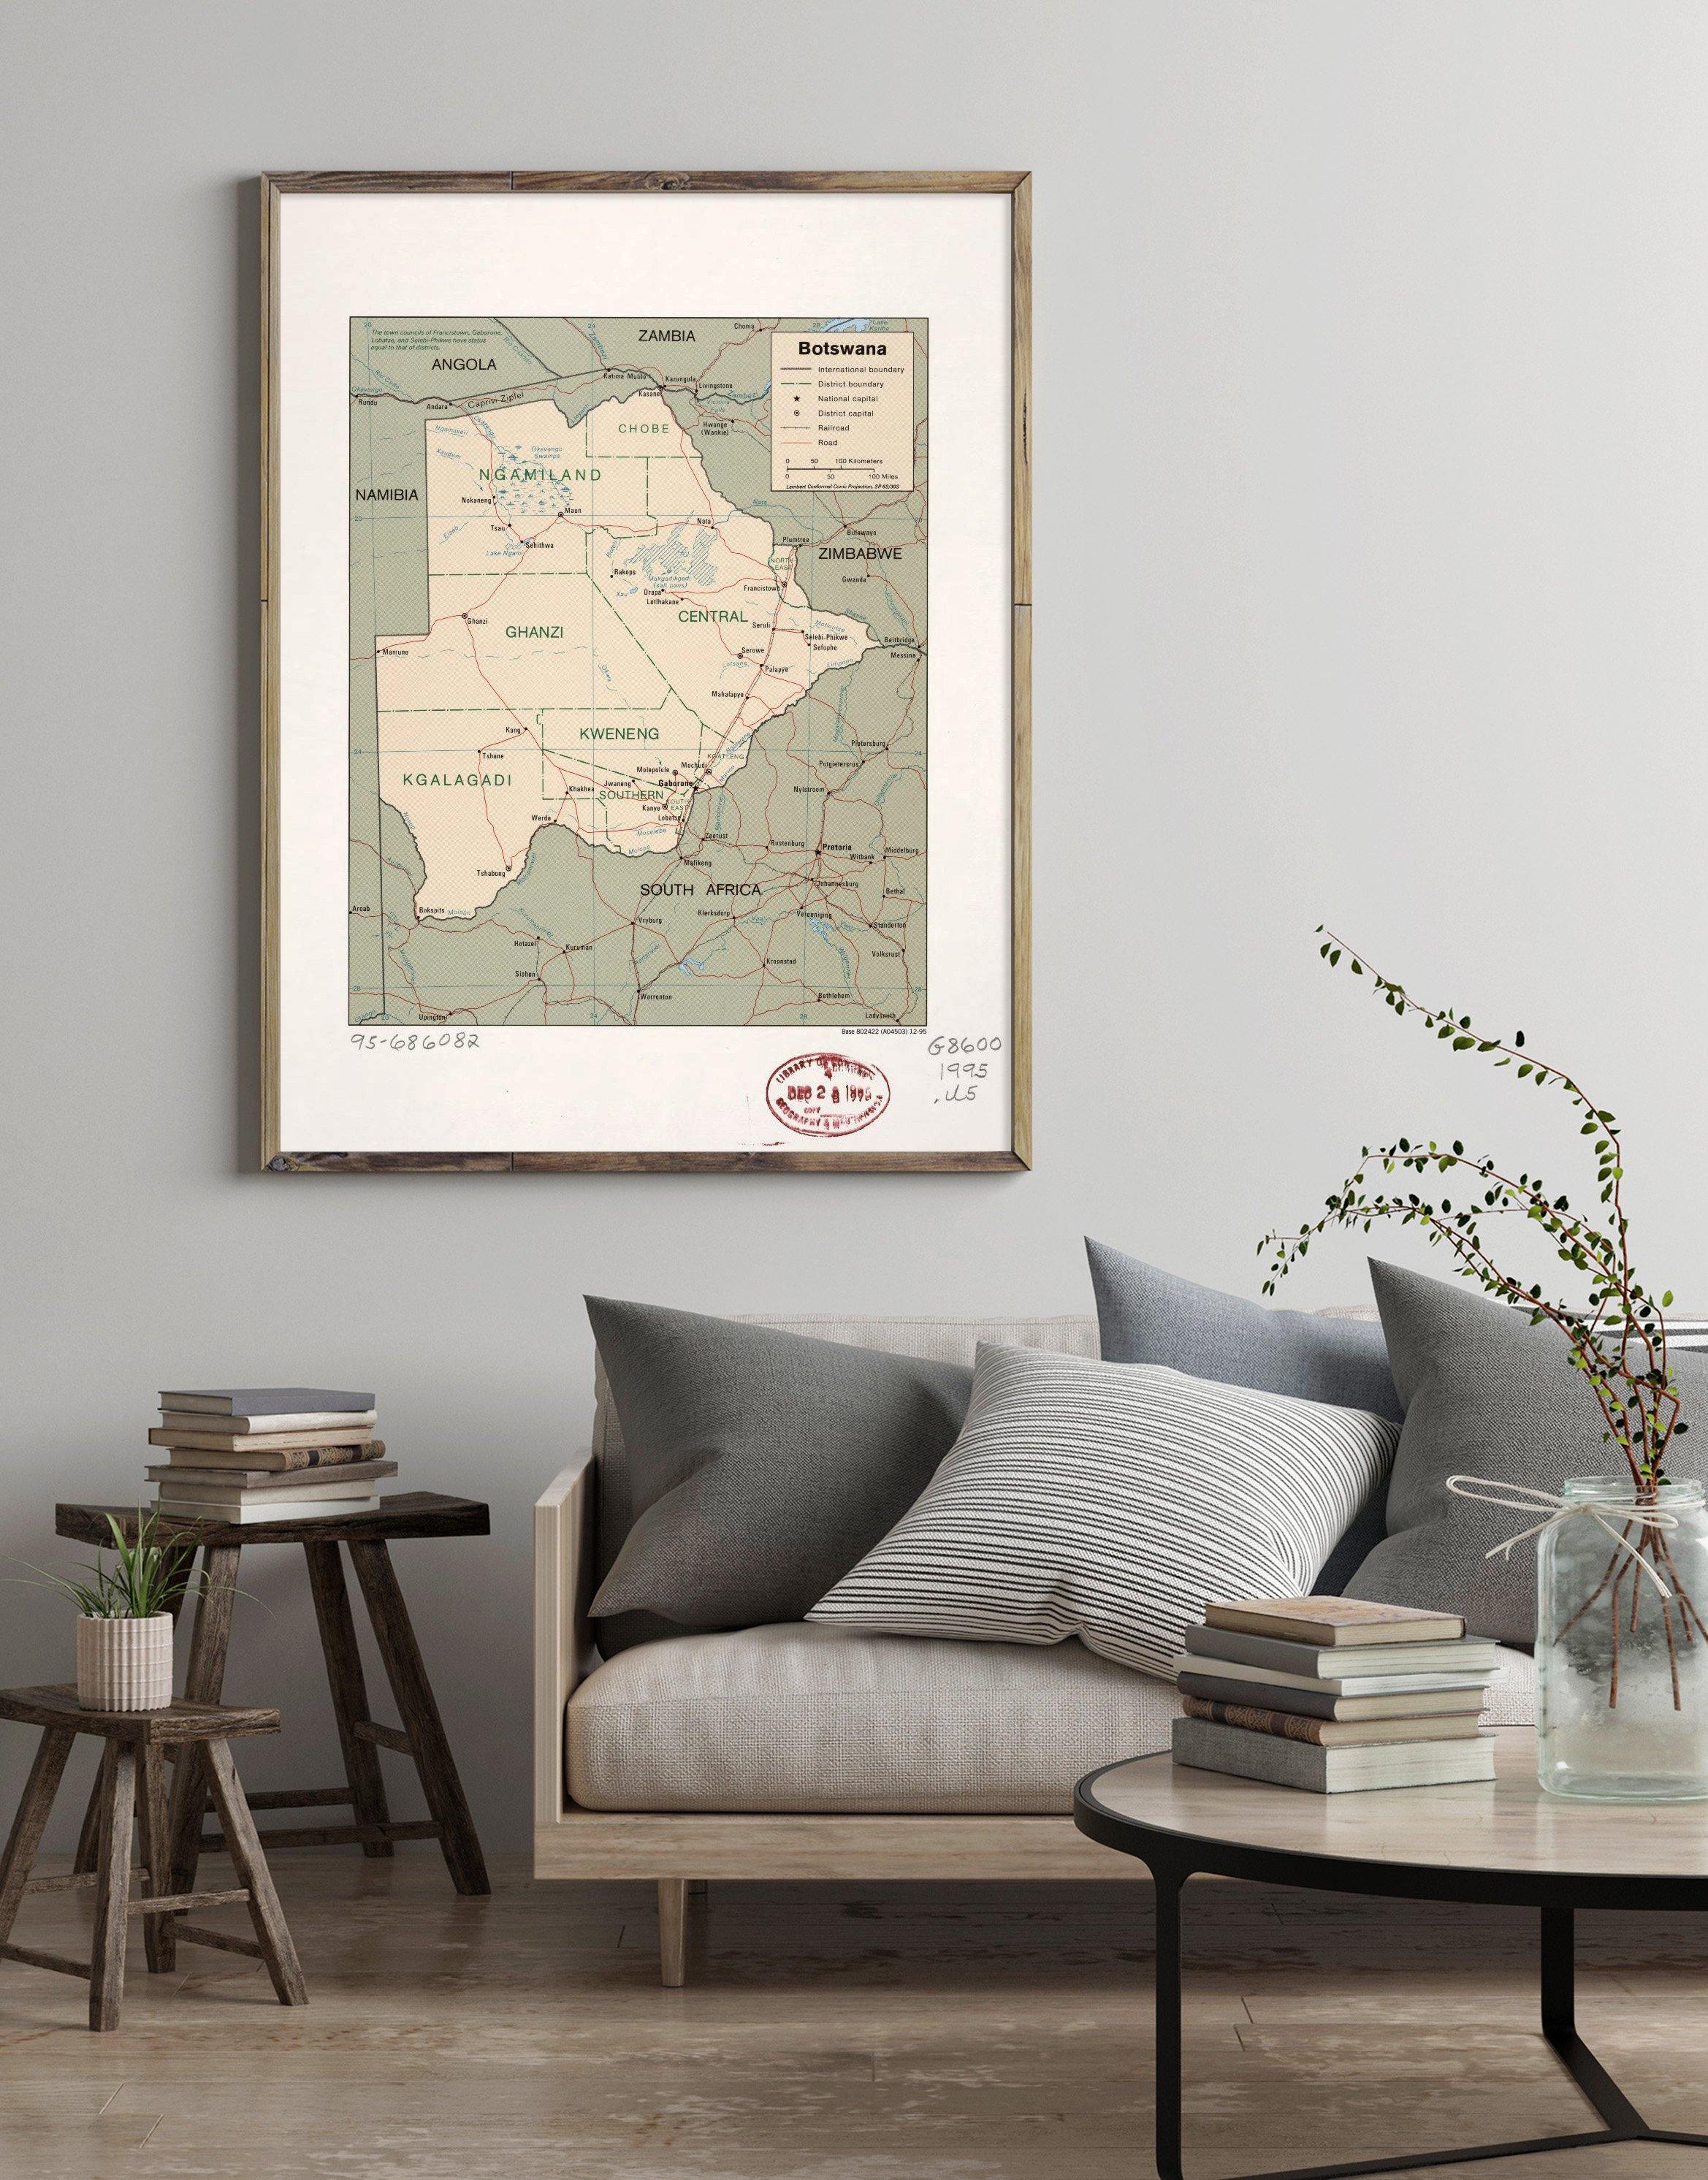 1995 Map| Botswana| Botswana Map Size: 18 inches x 24 inches |Fits 18x - New York Map Company